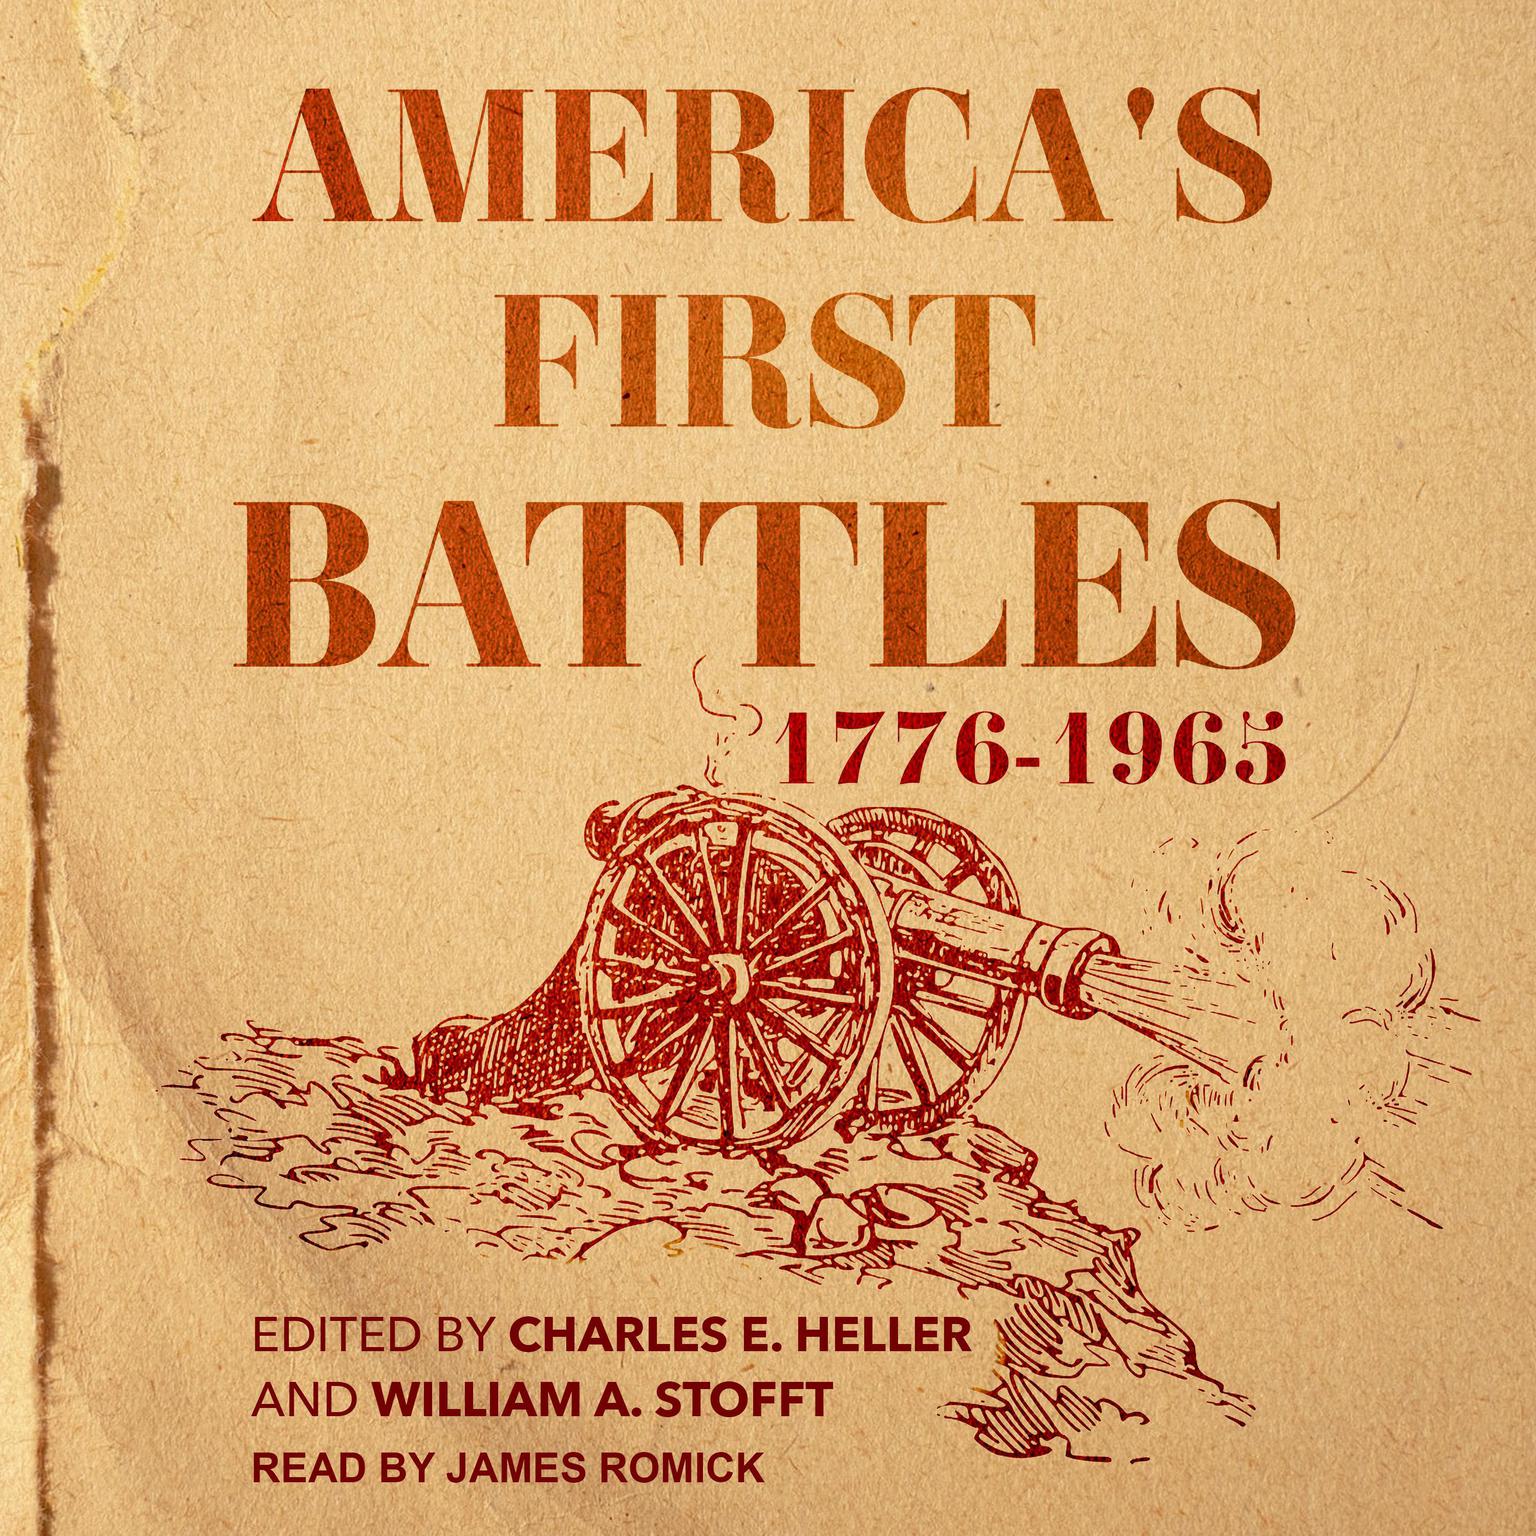 Americas First Battles, 1776-1965 Audiobook, by Charles E. Heller